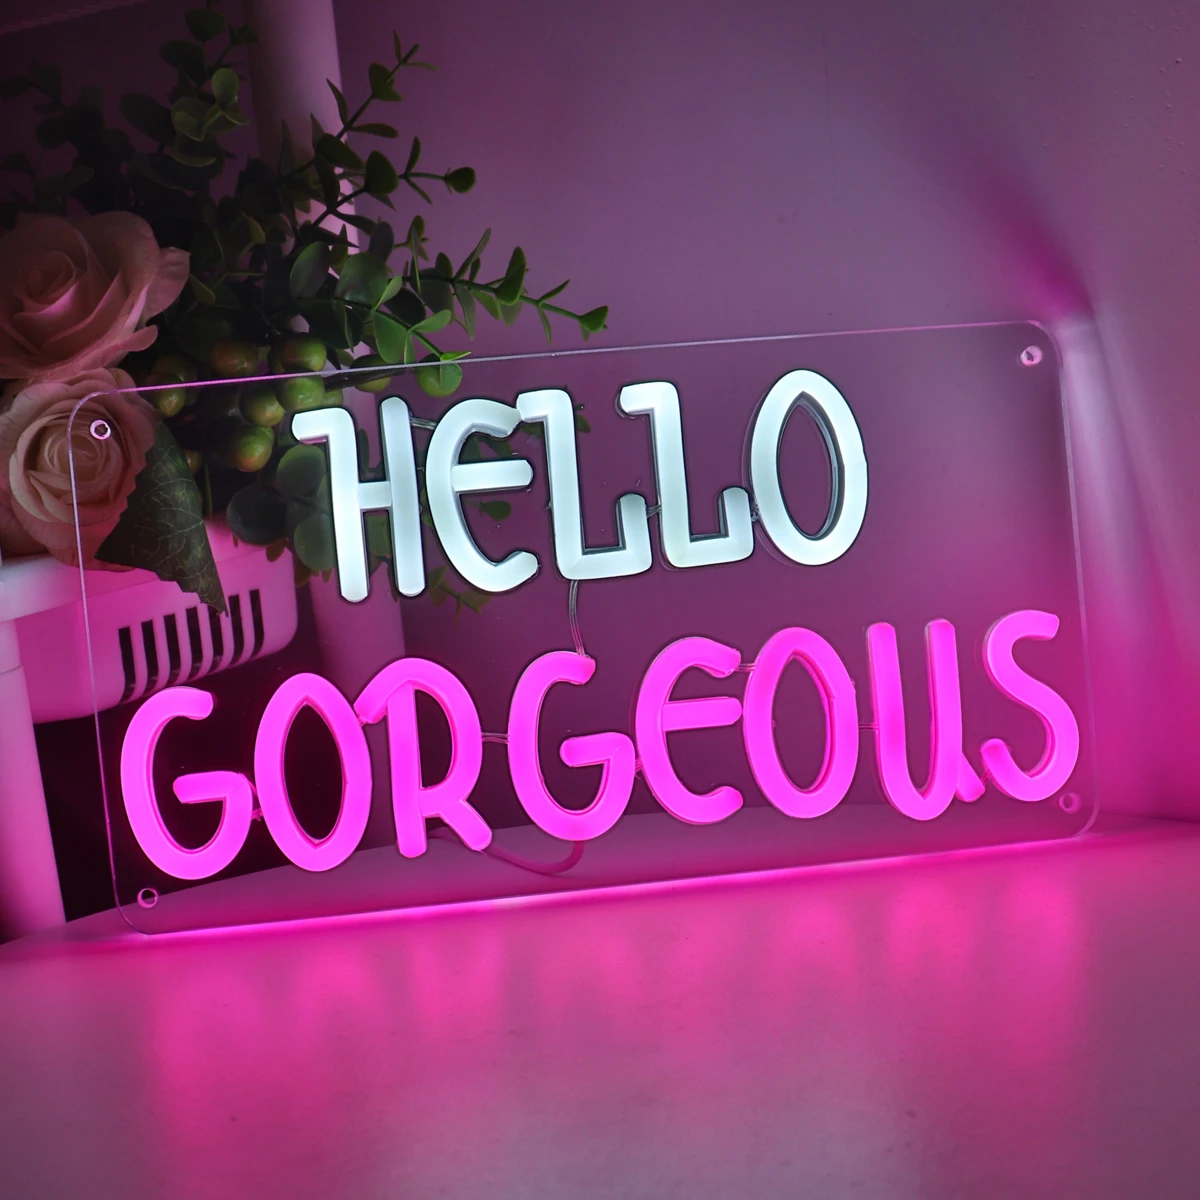 1PC Super Bright Hello Gorgeous Wall LED Neon Art Sign For Girls Room Party Shop Saloon Gallery Decoration 11.22''*5.98'' new colorful bright silk wool ball headband creative children s personality hair accessories holiday party gift headwear